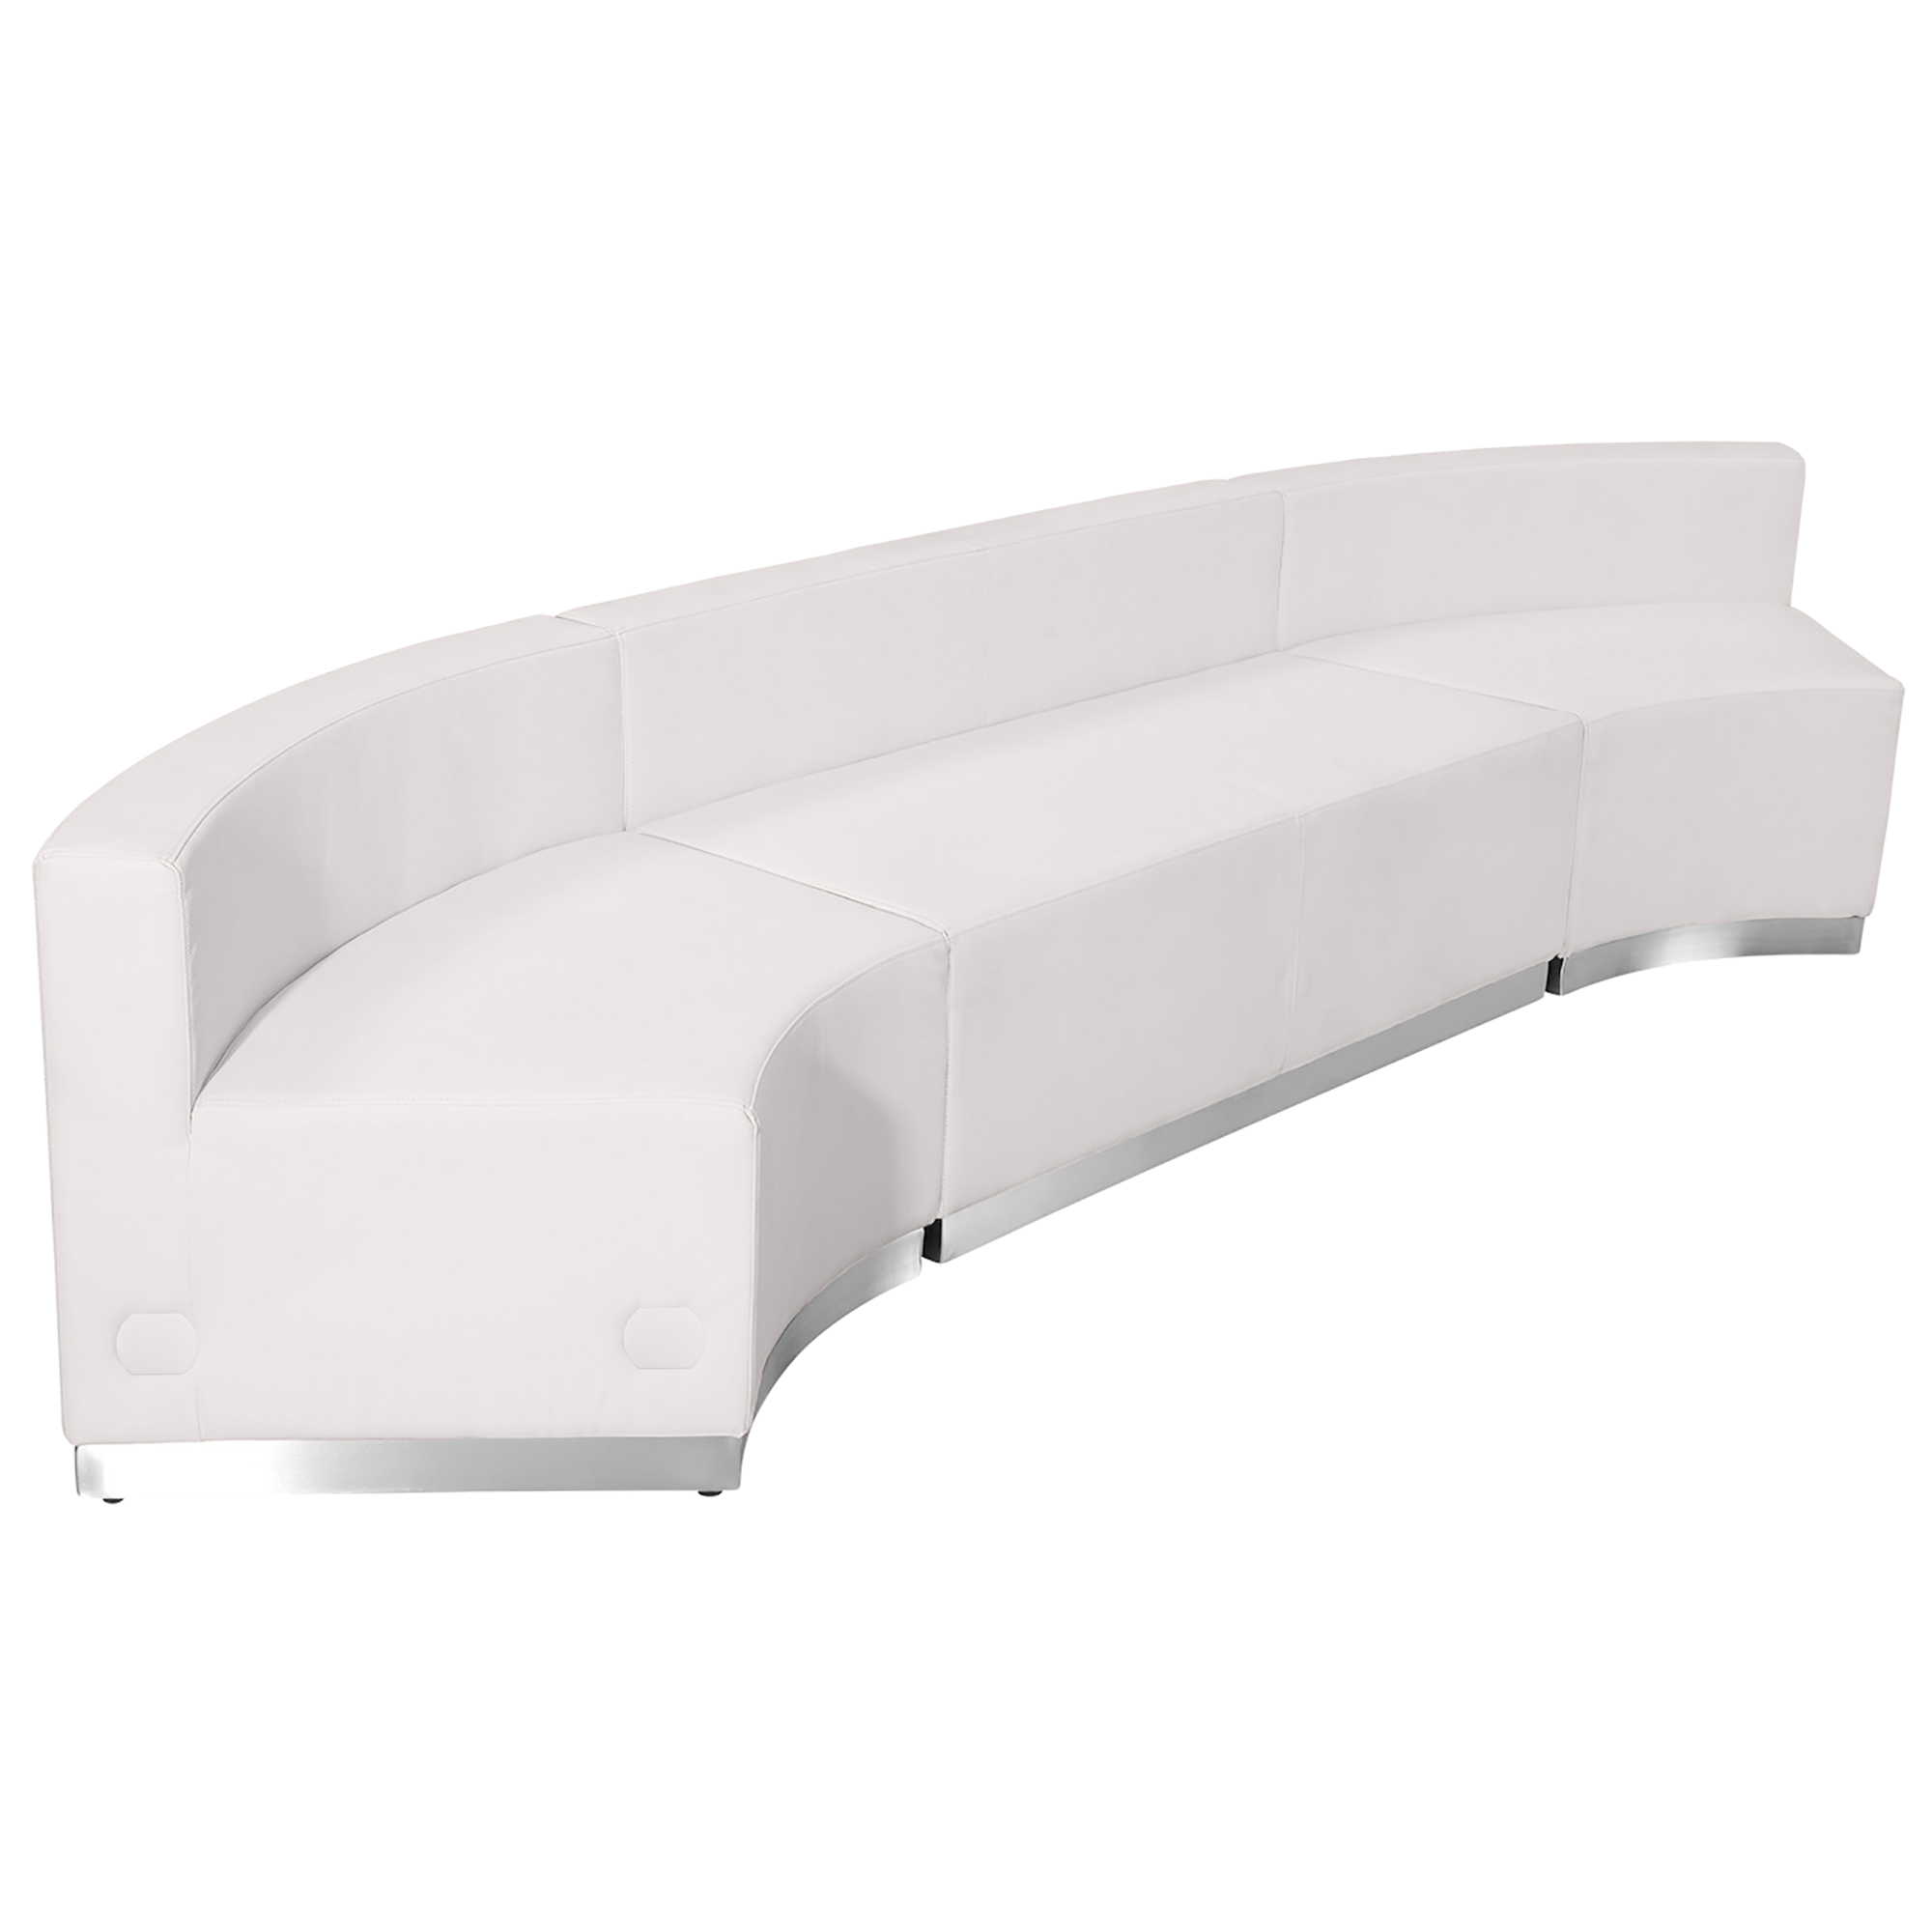 Flash Furniture, 3 PC White LeatherSoft Reception Configuration, Primary Color White, Included (qty.) 3, Model ZB803770SWH